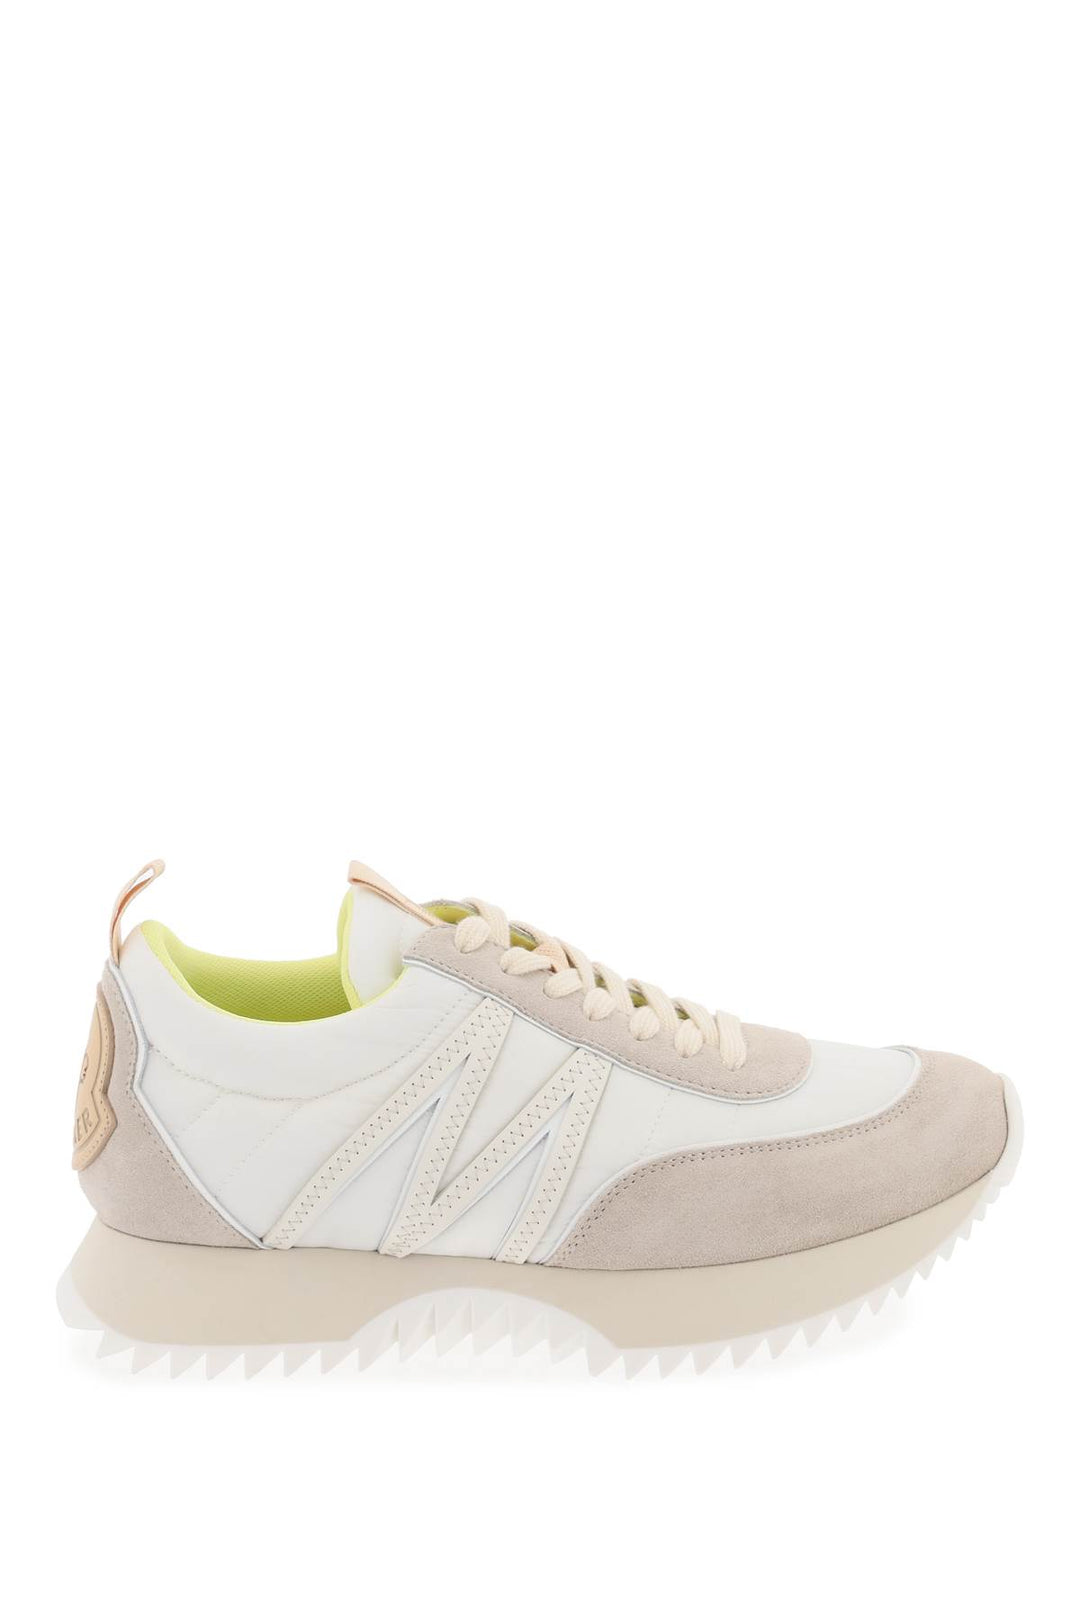 Moncler Pacey Sneakers In Nylon And Suede Leather.   White